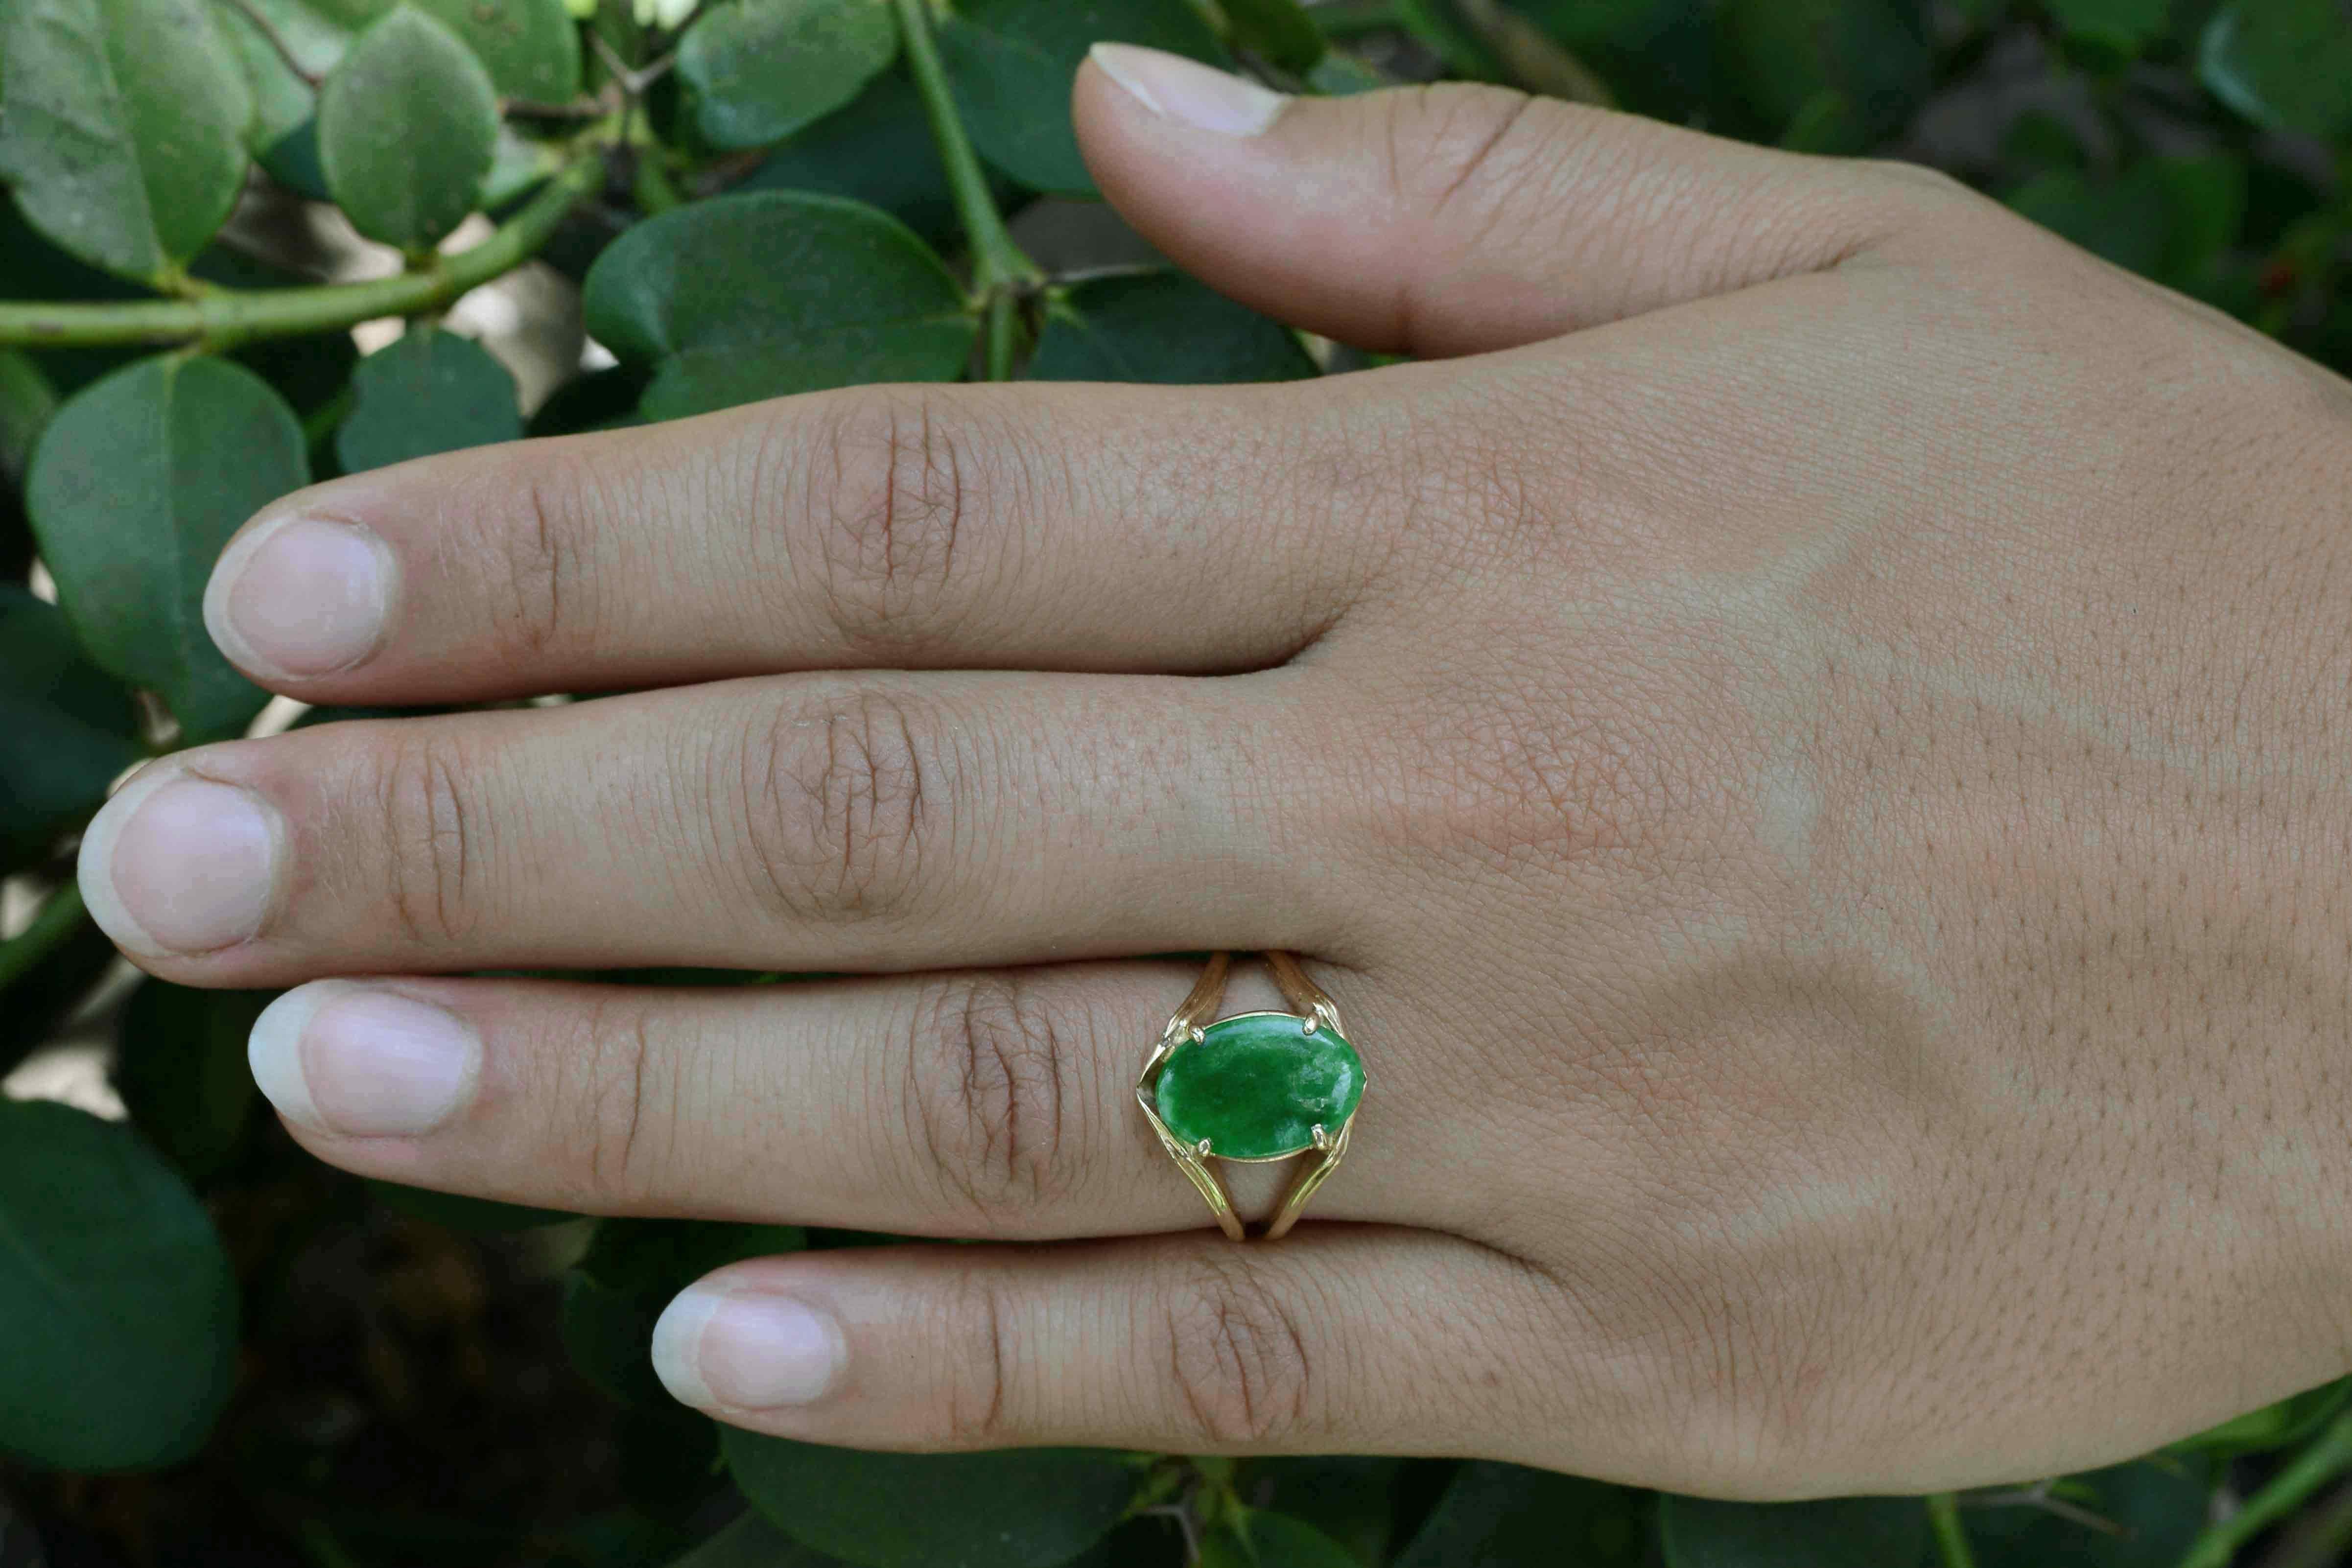 Boasting an outstanding vivid green, this Imperial Jade solitaire ring sits comfortably on your hand in a classic, Mid Century modern setting. The natural oval jadeite gemstone glows from a fire from within. Recently acquired from a local Montecito,